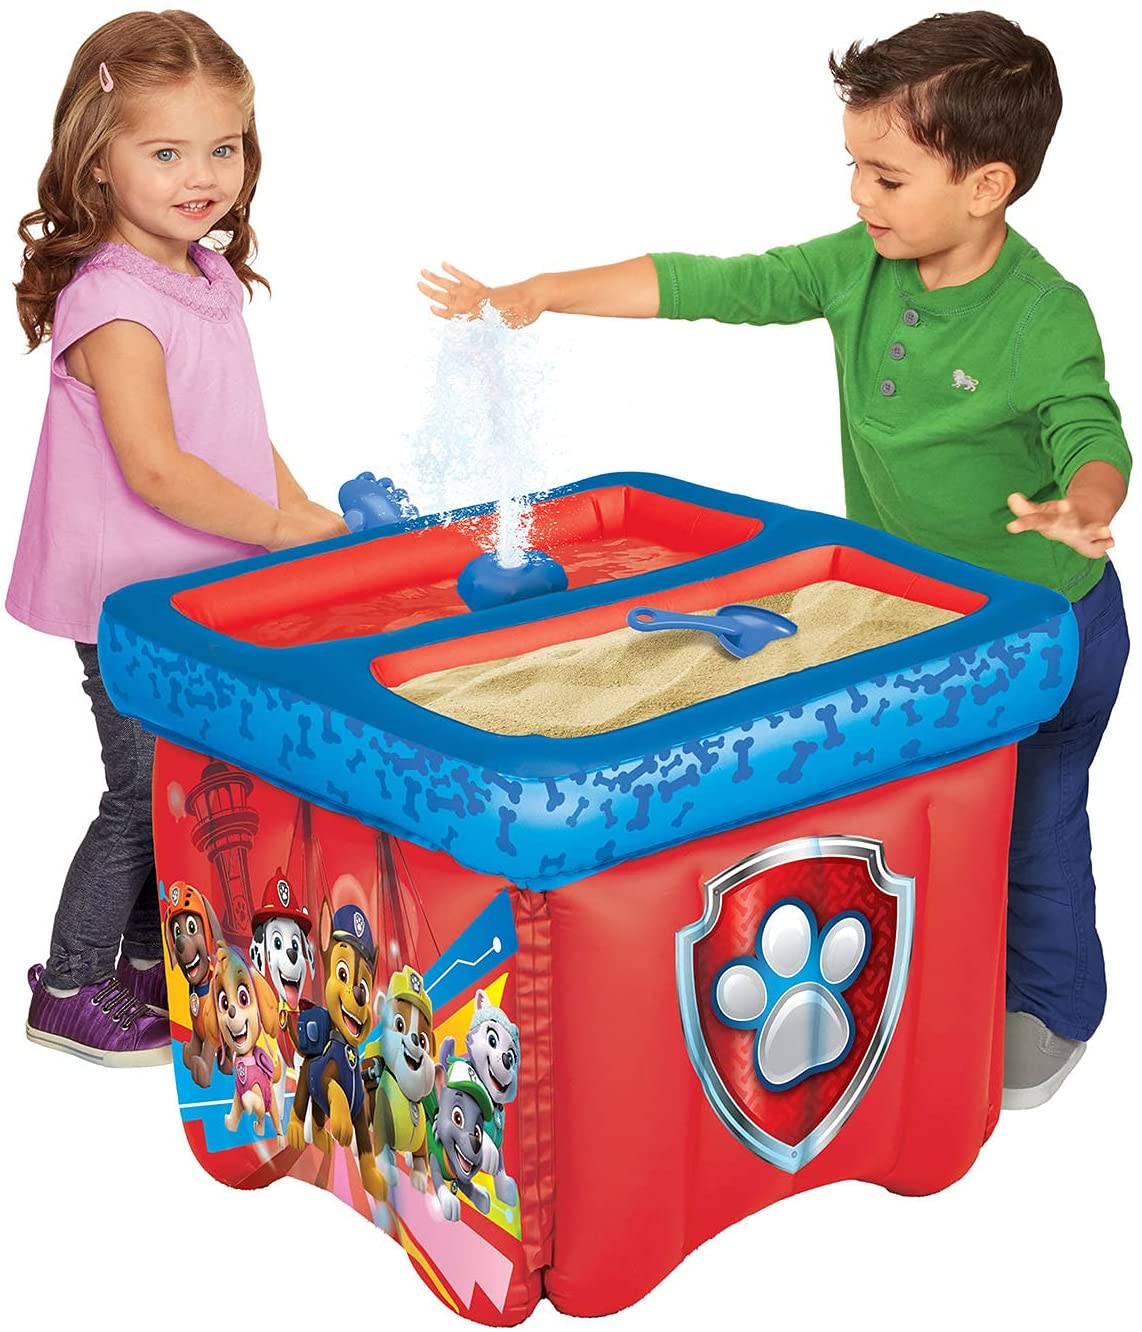 Paw Patrol Inflatable Table Price Drop at Amazon!